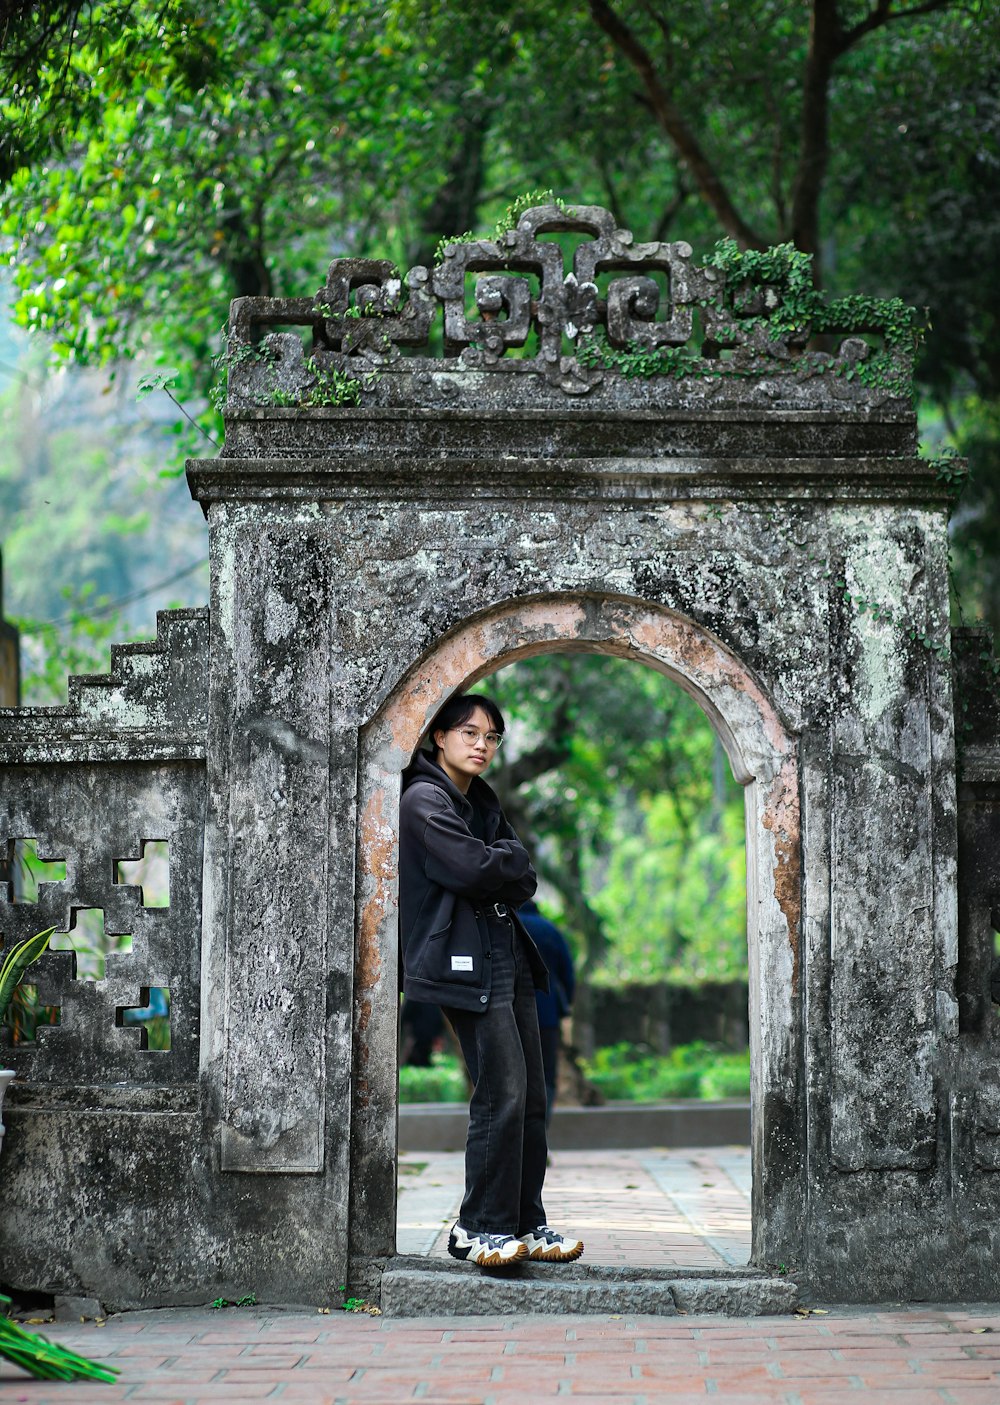 a man standing in a stone archway in a park